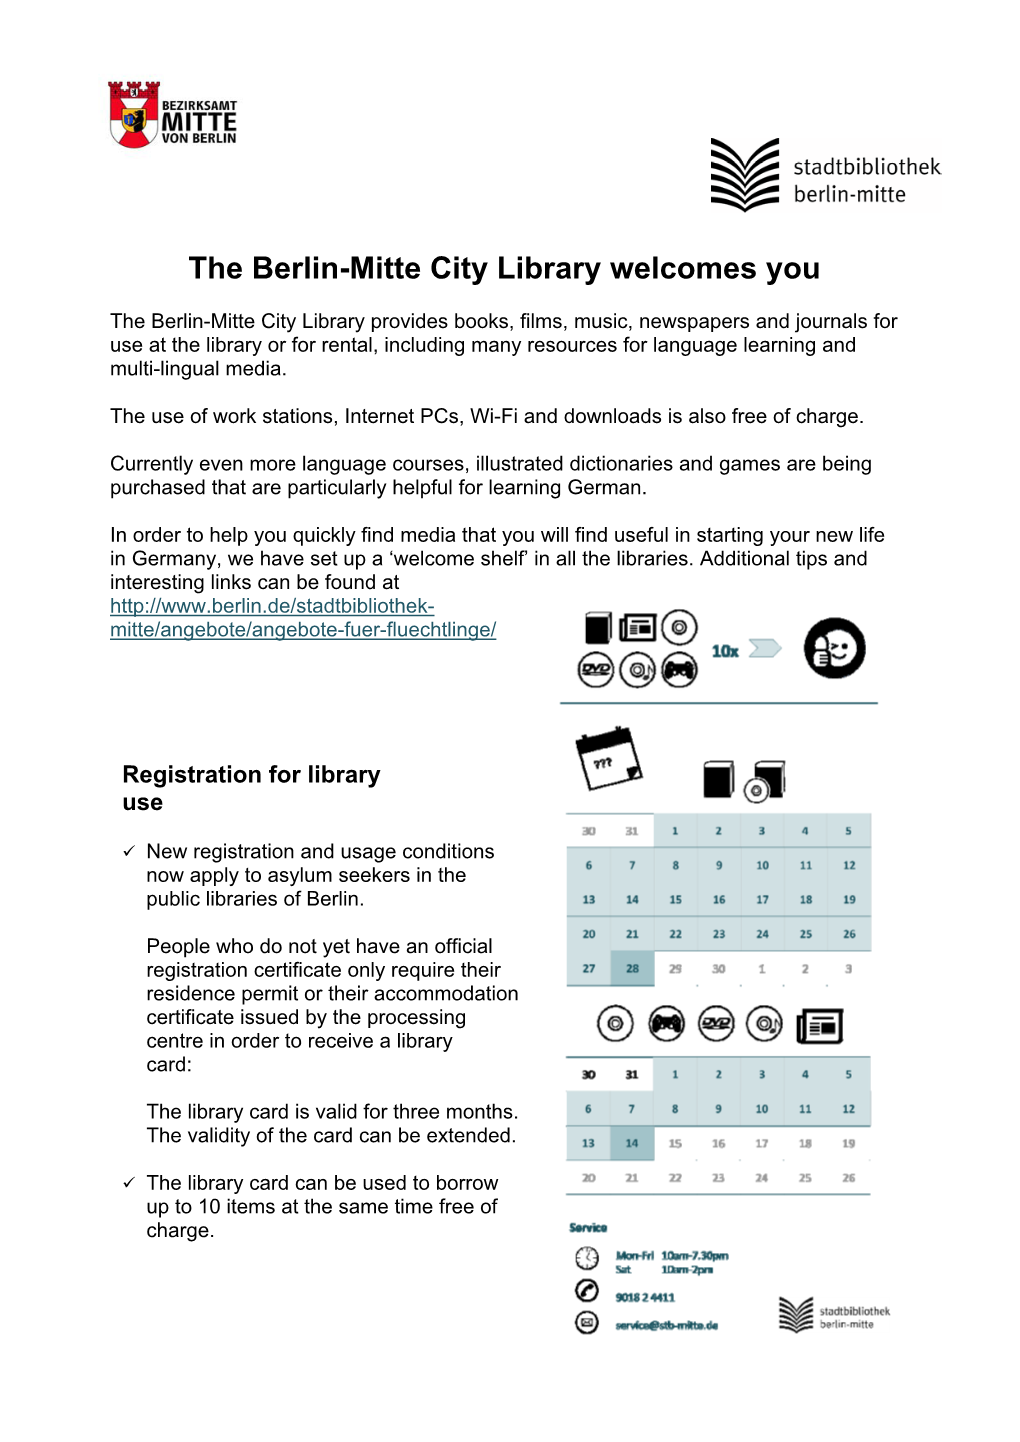 The Berlin-Mitte City Library Welcomes You